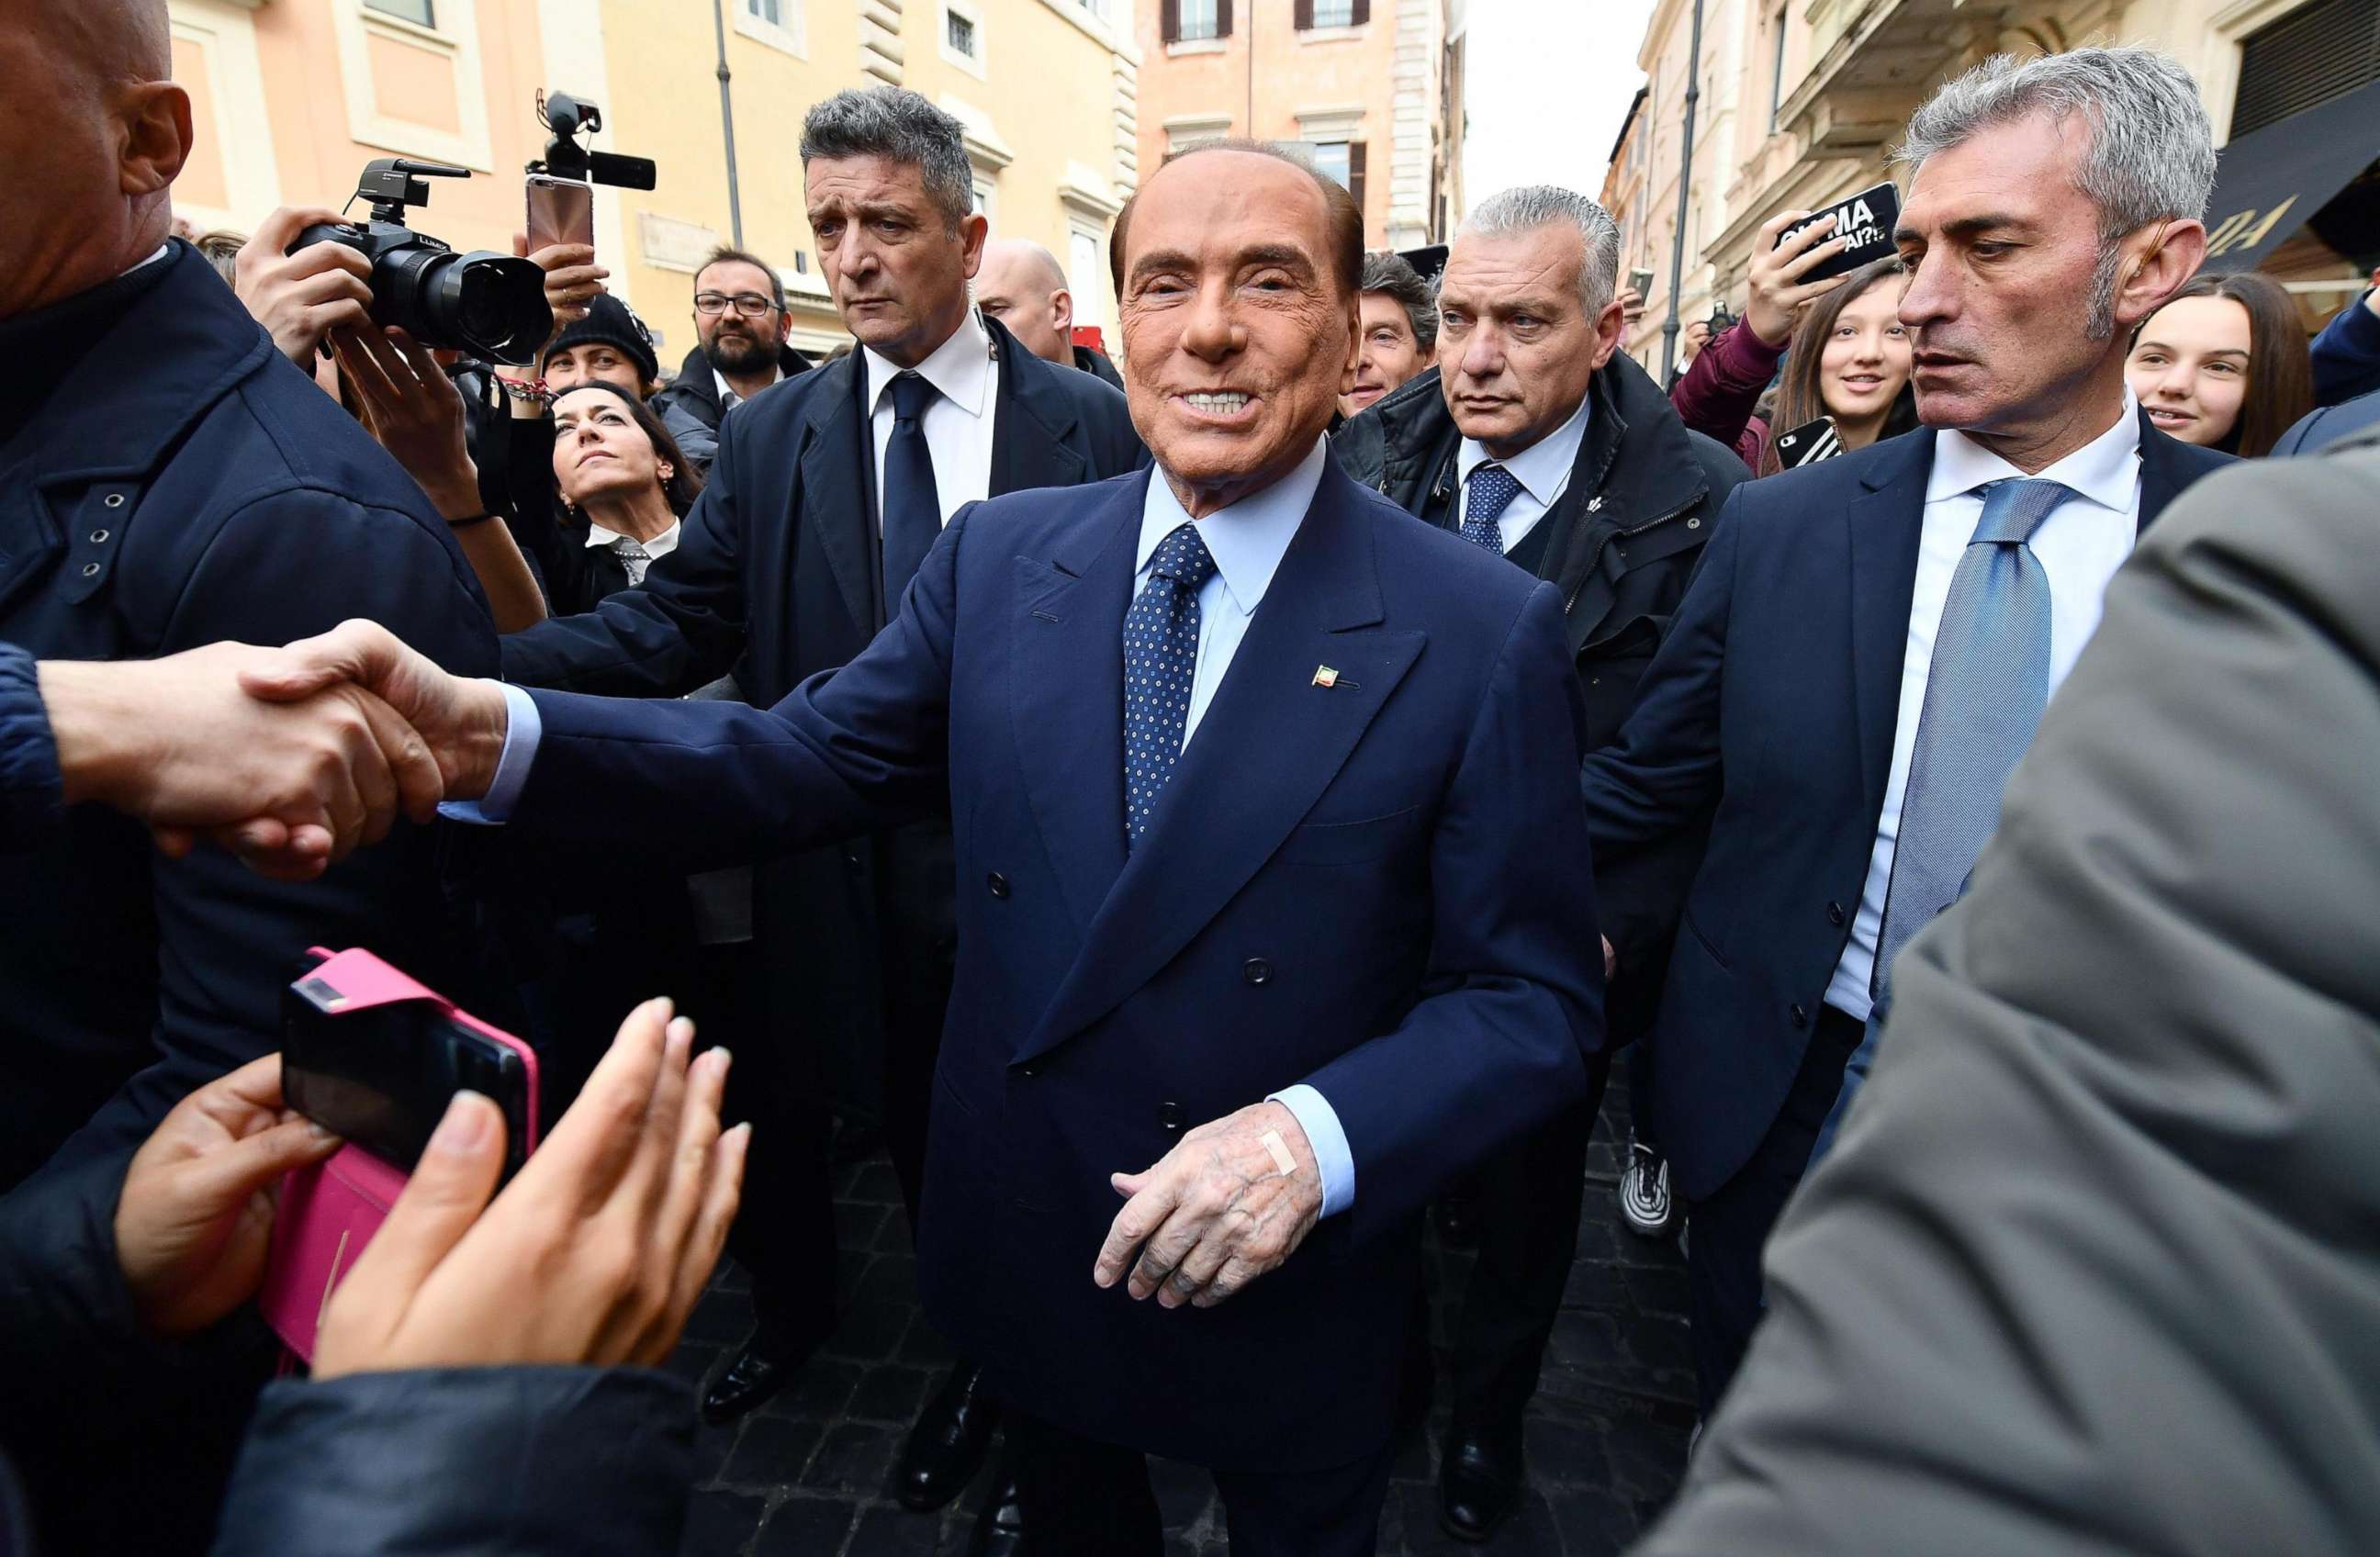 PHOTO: Former Italian Prime Minister Silvio Berlusconi arrives to meet Manfred Weber, Chairman of the European People's Party Group in the European Parliament, at Forza Italia party headquarters, Rome, Feb. 21, 2018.